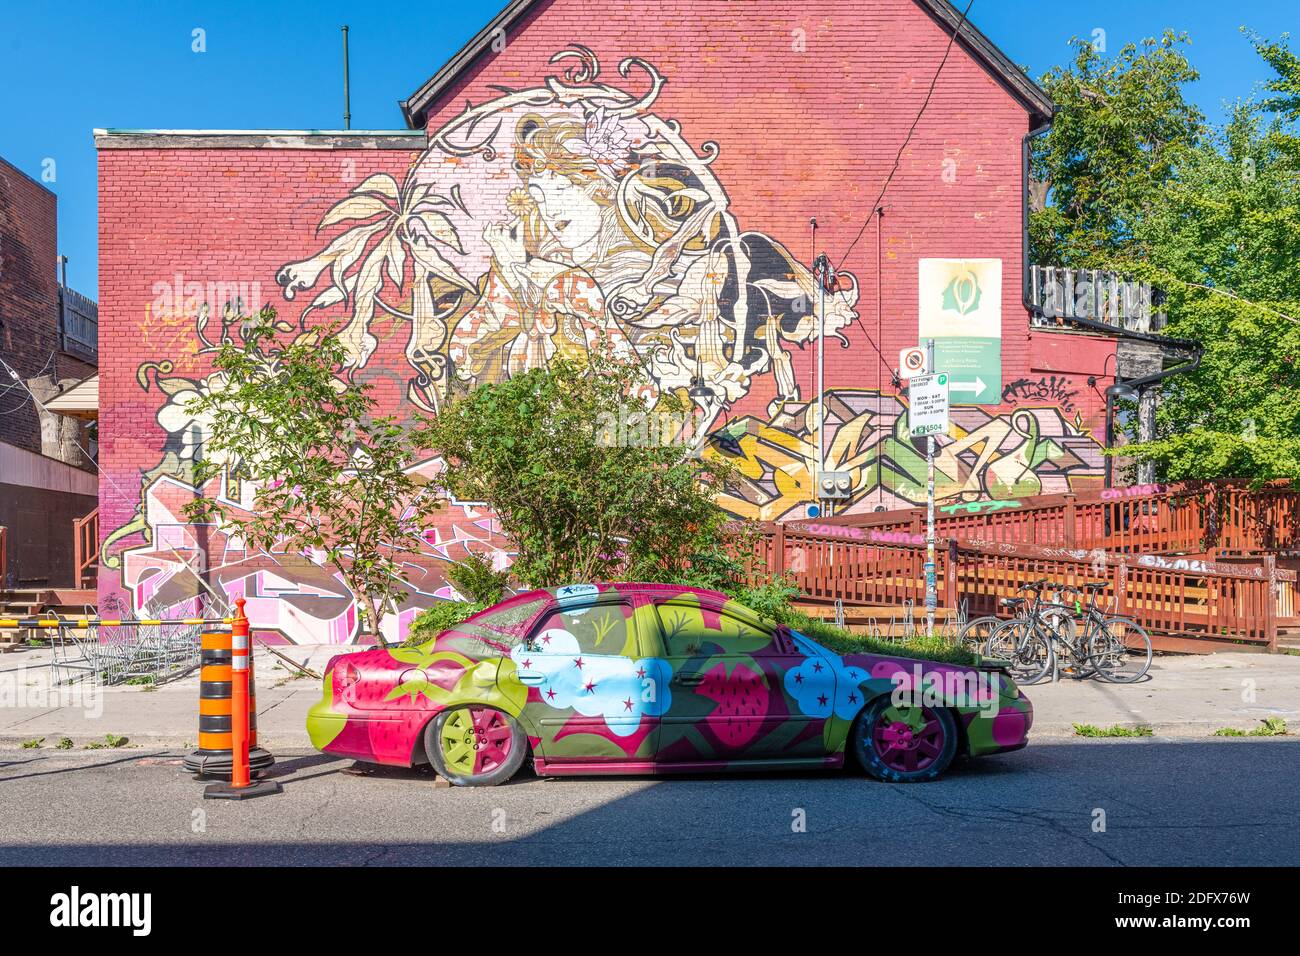 Kensington Market in Toronto, Canada. The Garden Car and painting decorating an old building Stock Photo